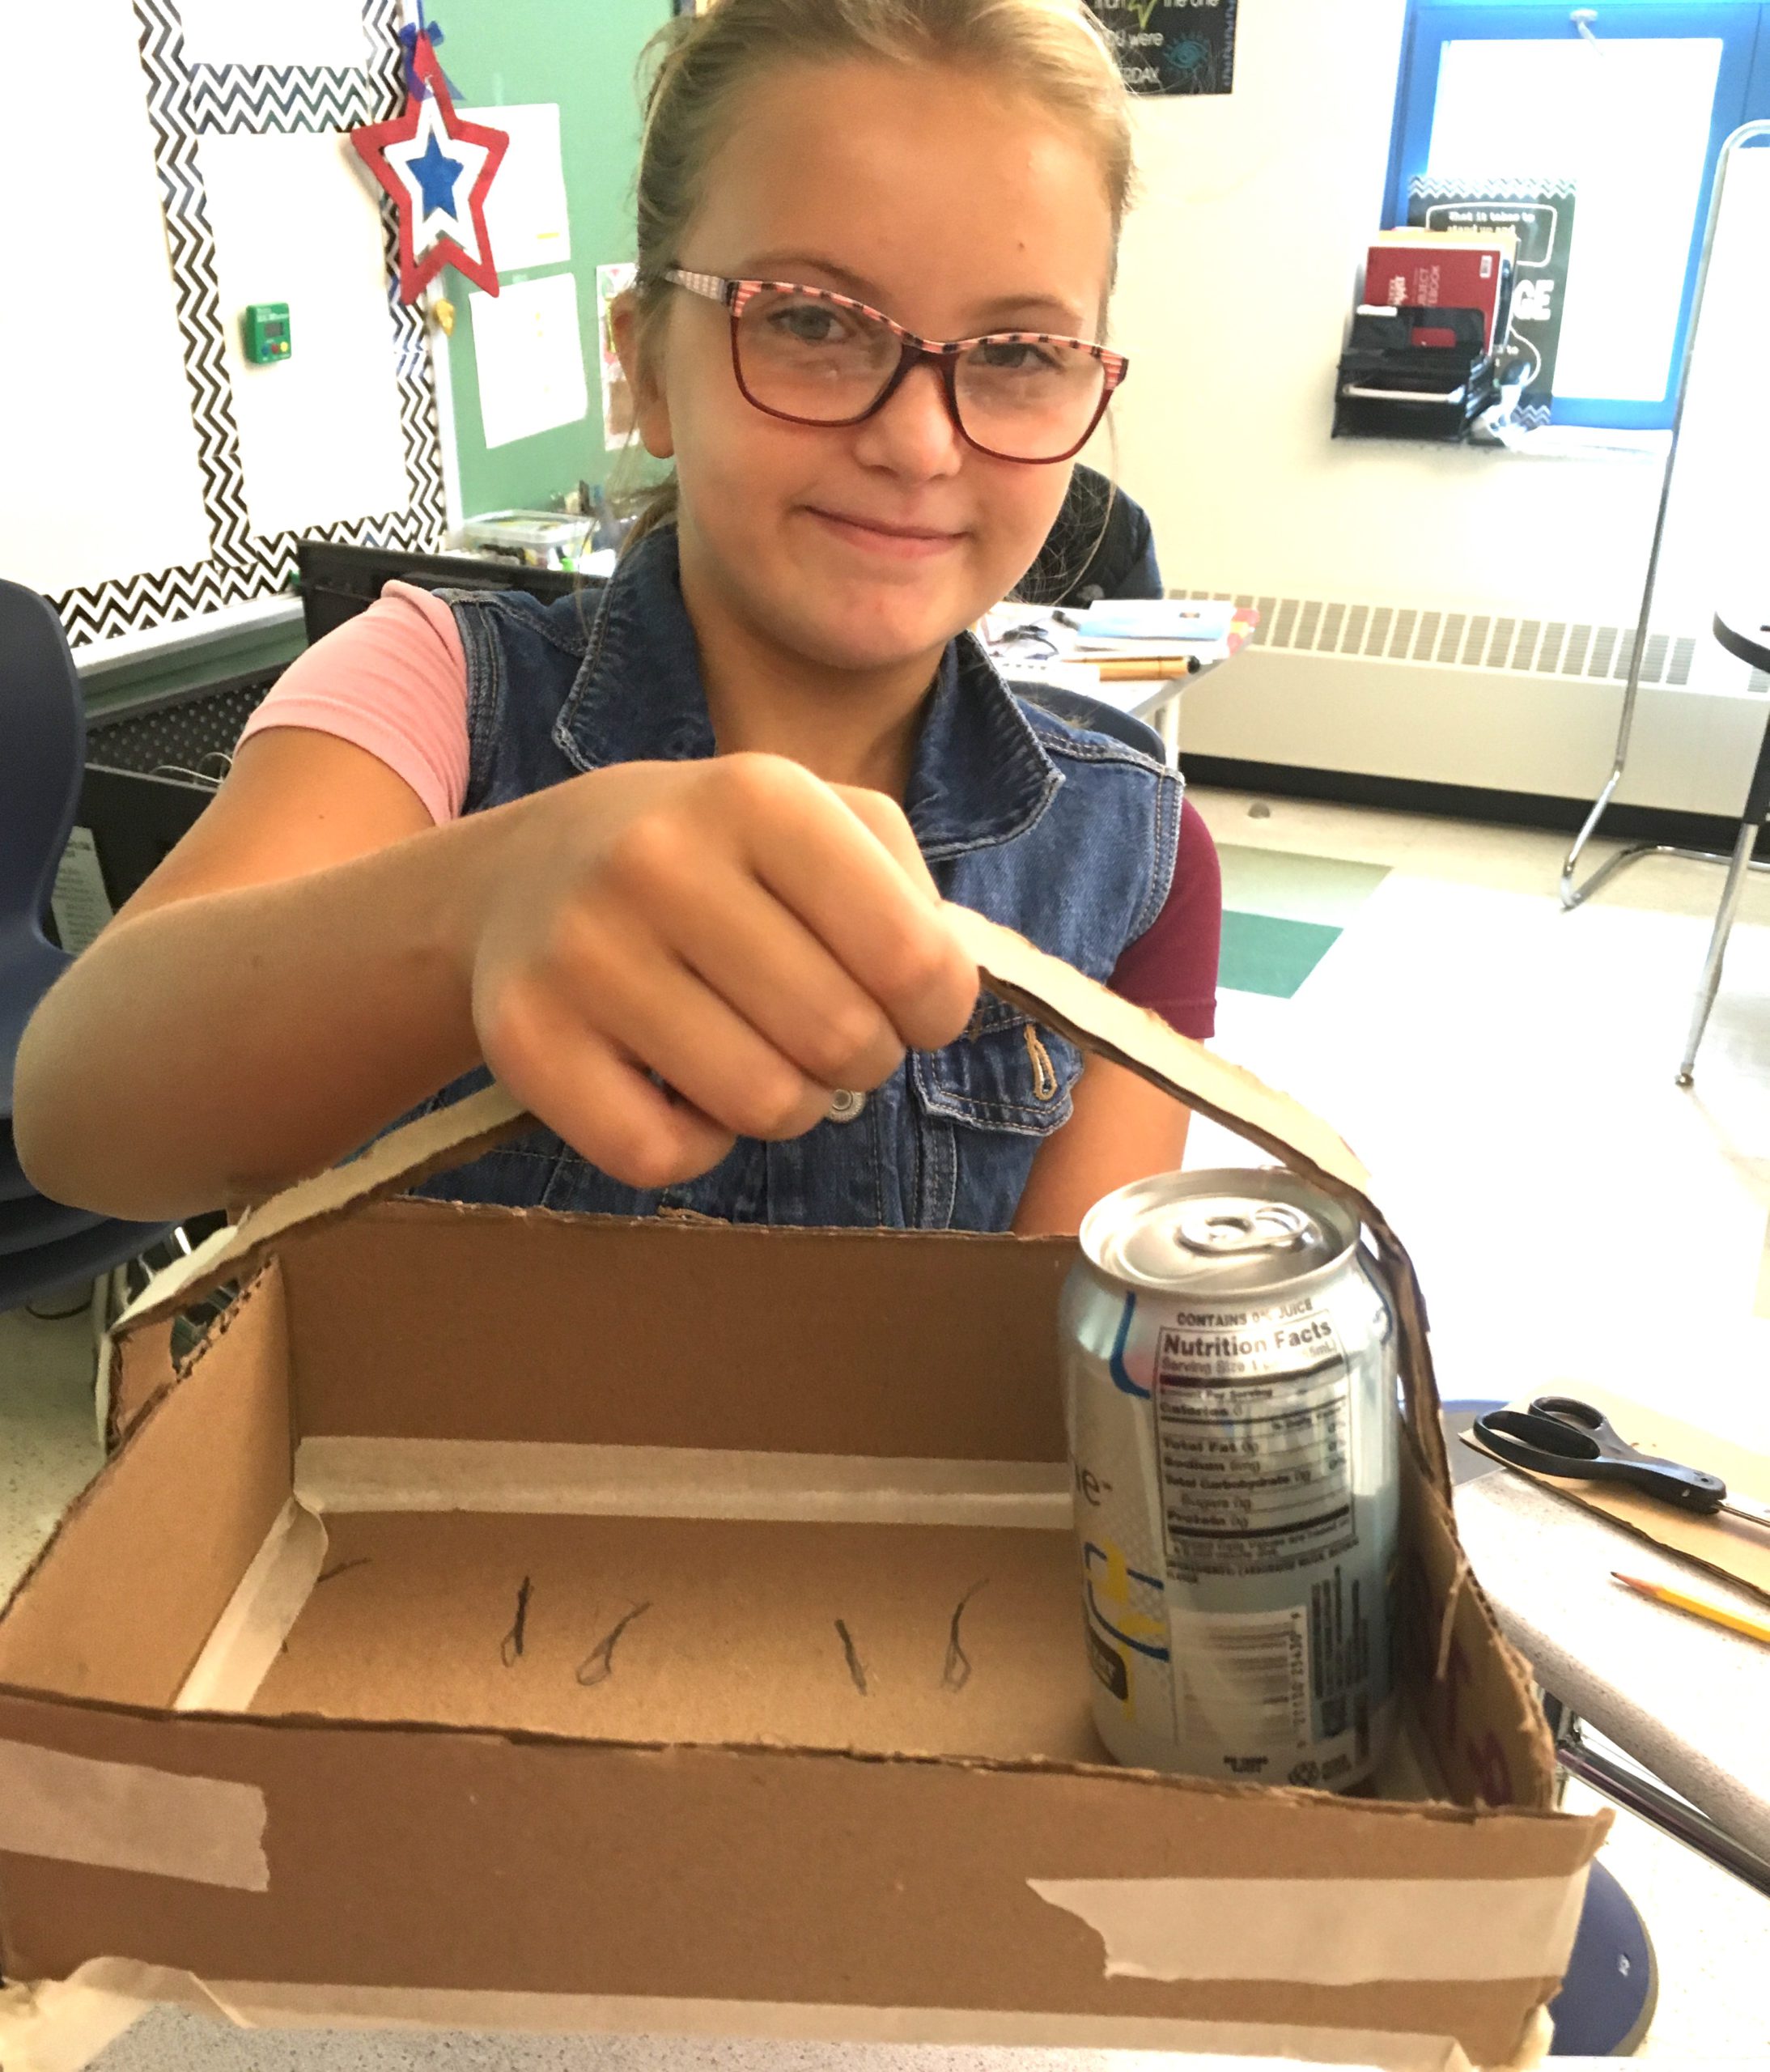 Phenomena-based science encourages students to ask questions, discover connections, and design models to make sense of what they observe. 